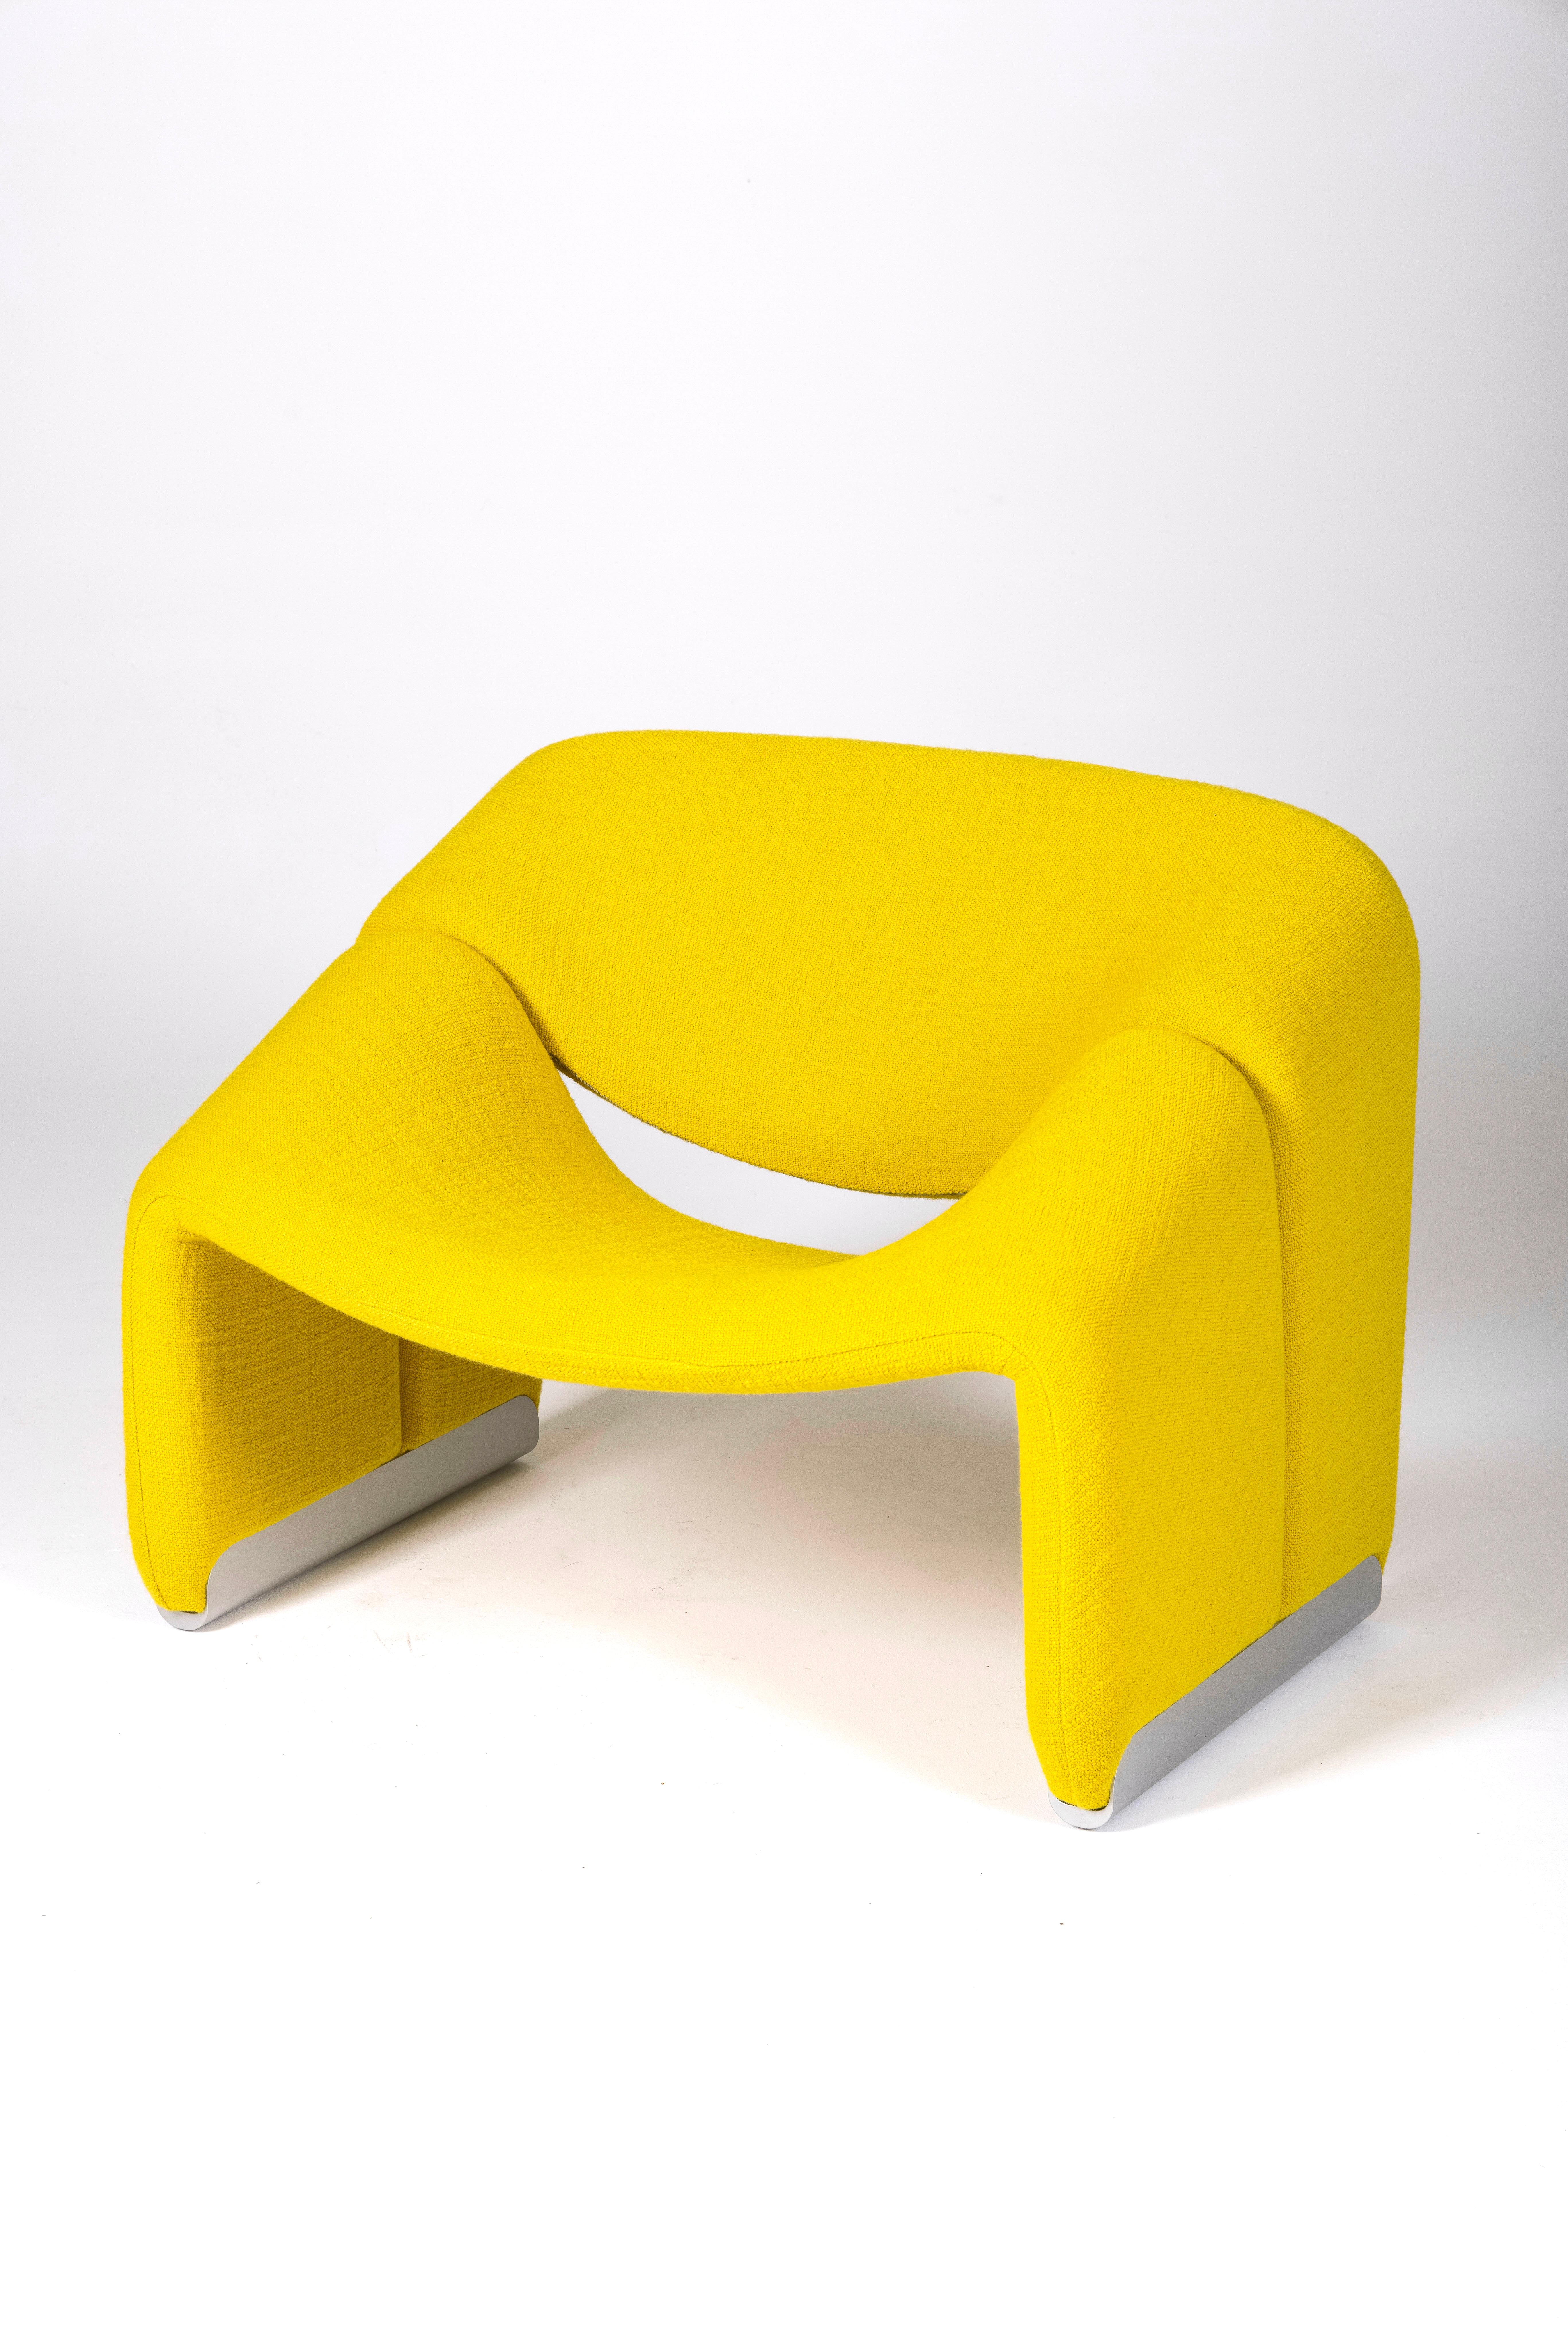 Groovy armchair, an iconic design by designer Pierre Paulin from the 1960s (1964). This armchair has been reupholstered with high-quality yellow fabric. The base features chrome-plated metal components.
LP1417